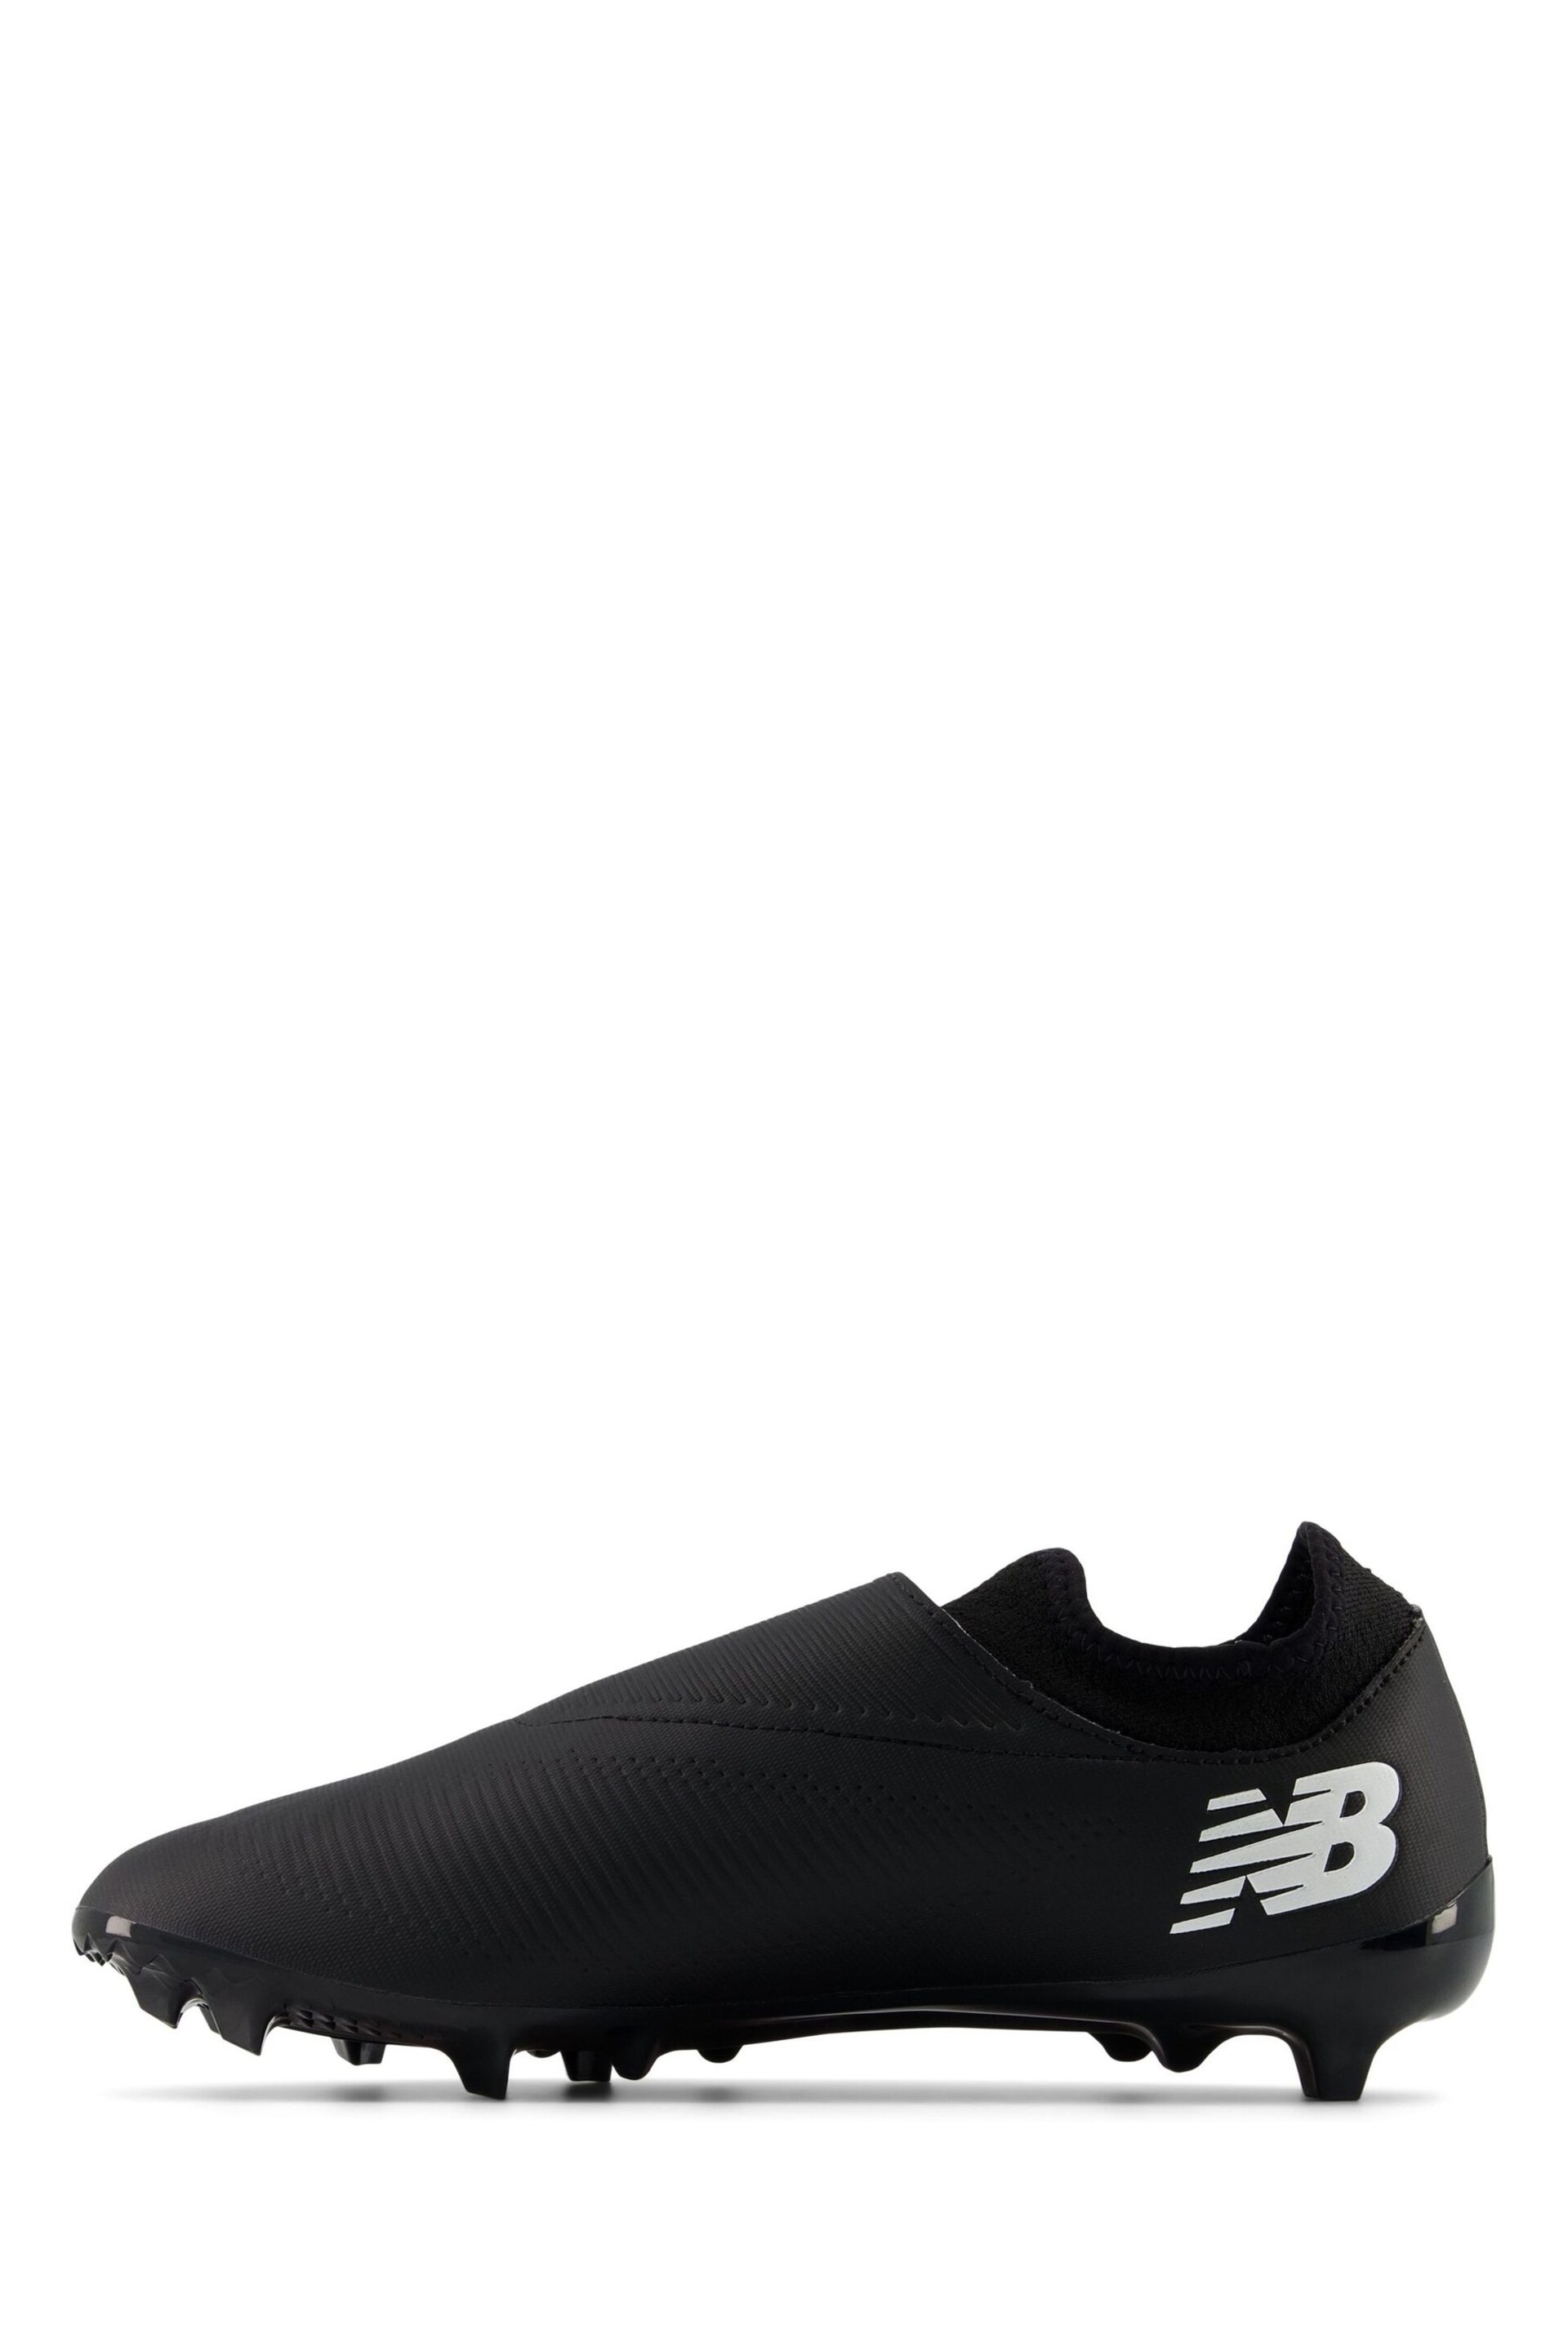 New Balance Black Mens Furon Firm Ground Football Boots - Image 3 of 5